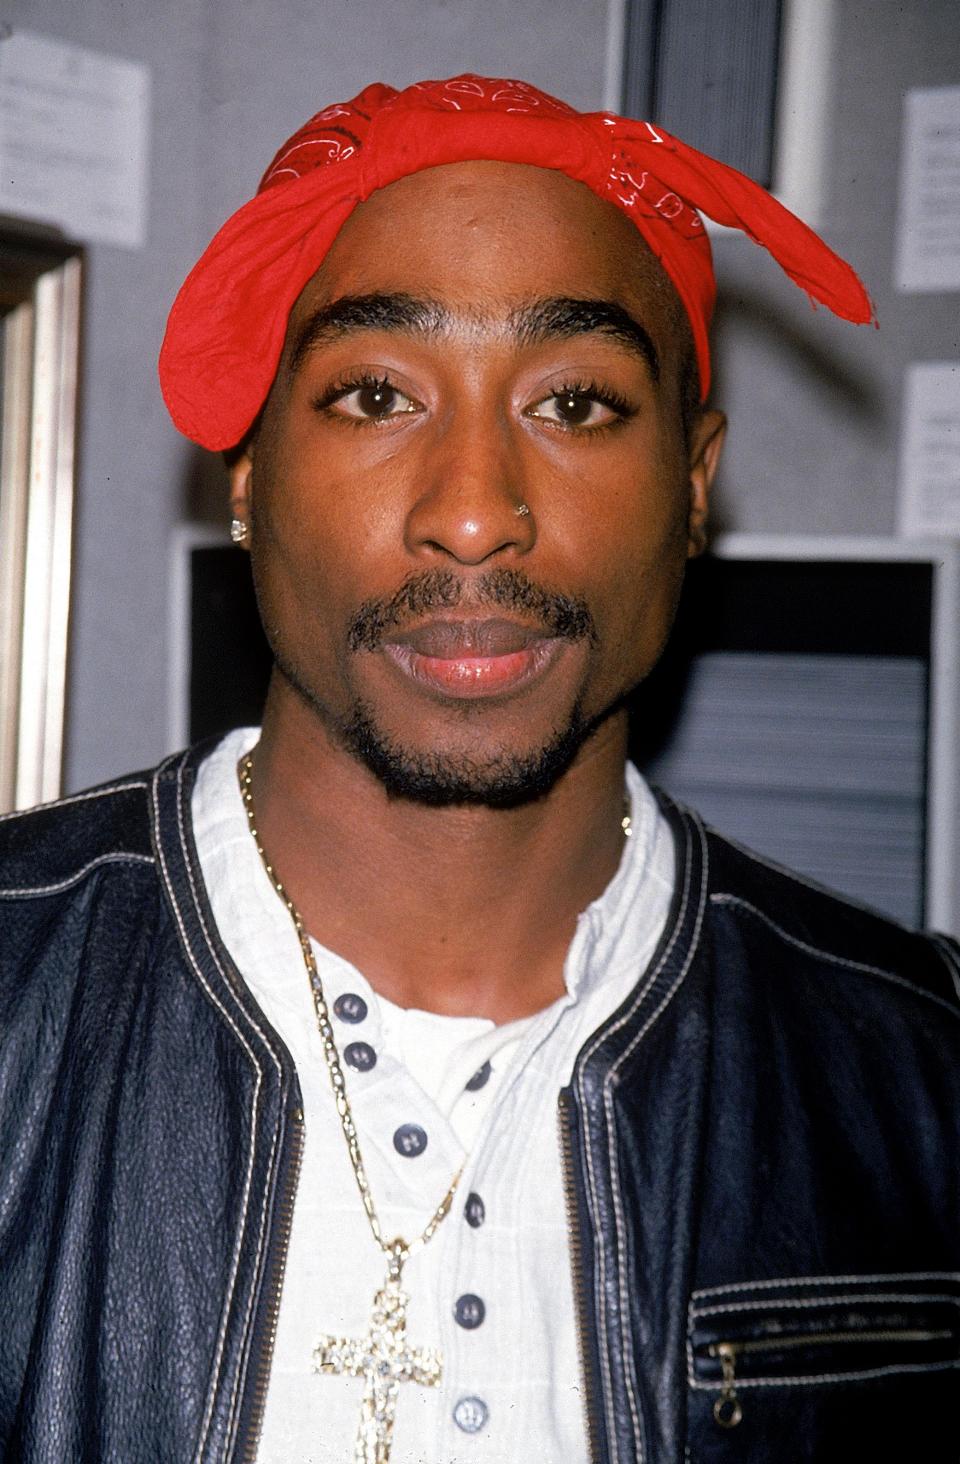 Dying Of Cancer, Gangster Confesses That He Was Among Those Who Brutally Murdered Rapper, Tupac Shakur